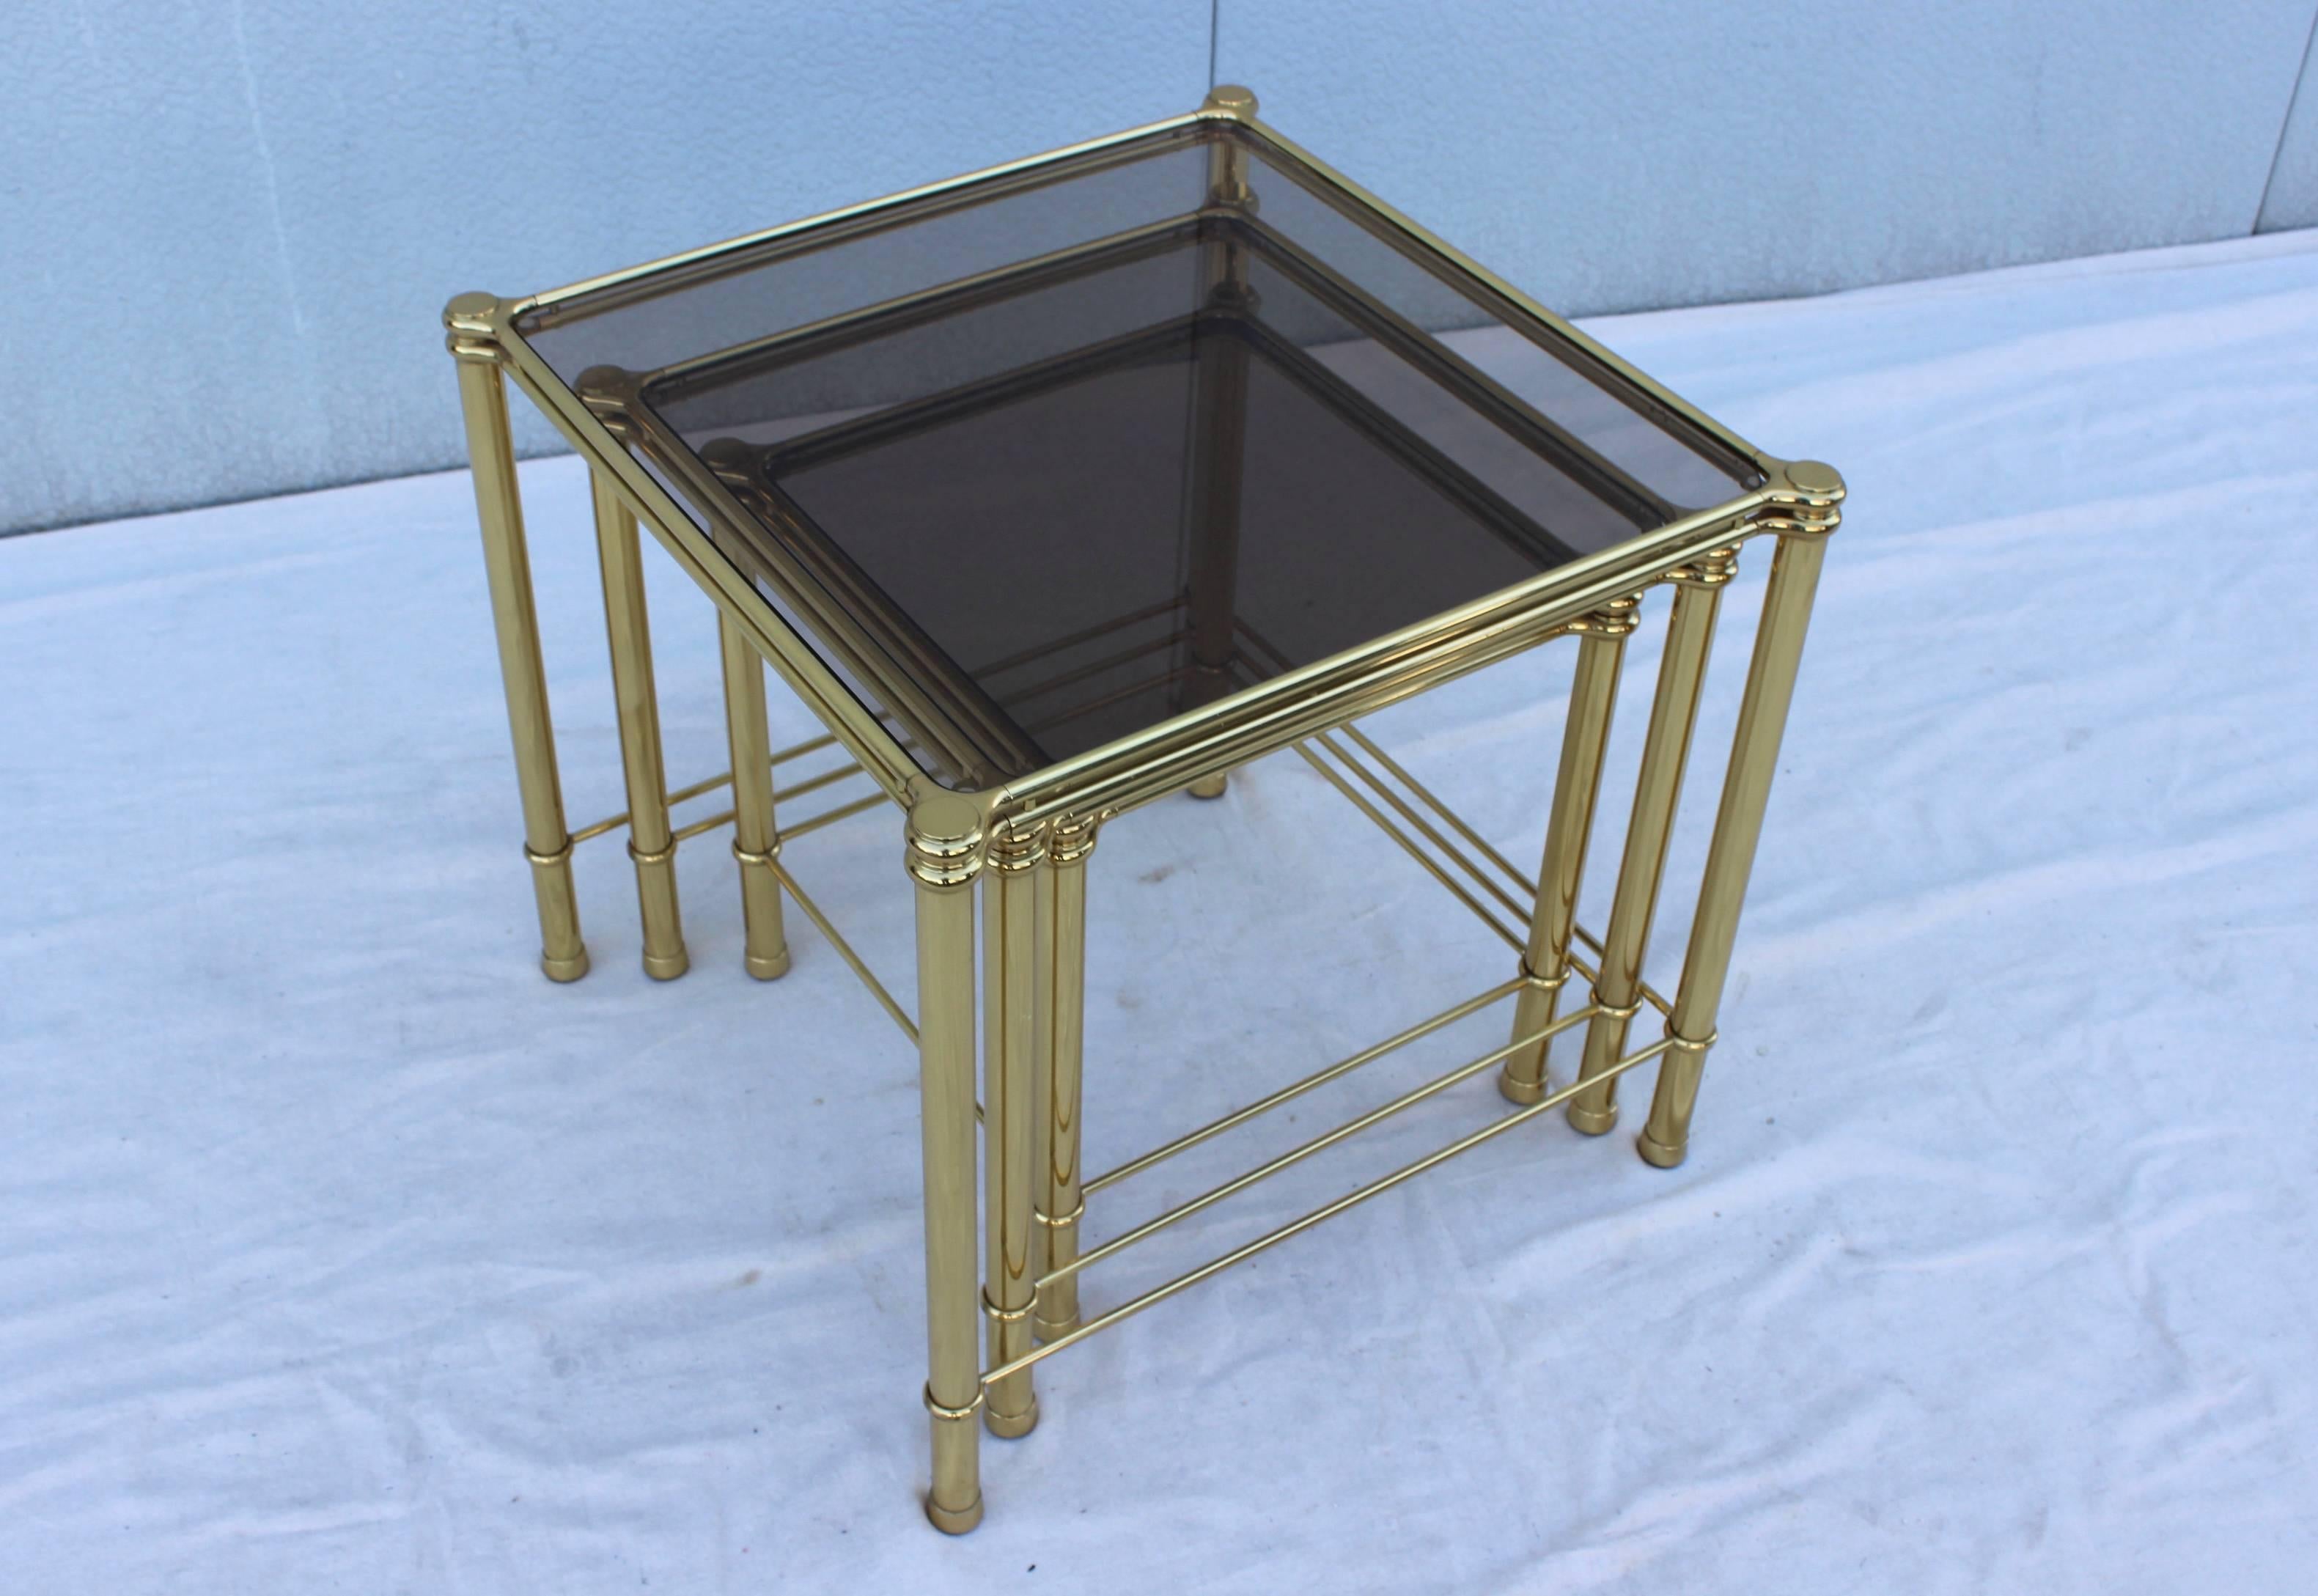 1960's Mid-Century Modern Italian Brass And Glass Nesting Tables In Good Condition For Sale In New York, NY